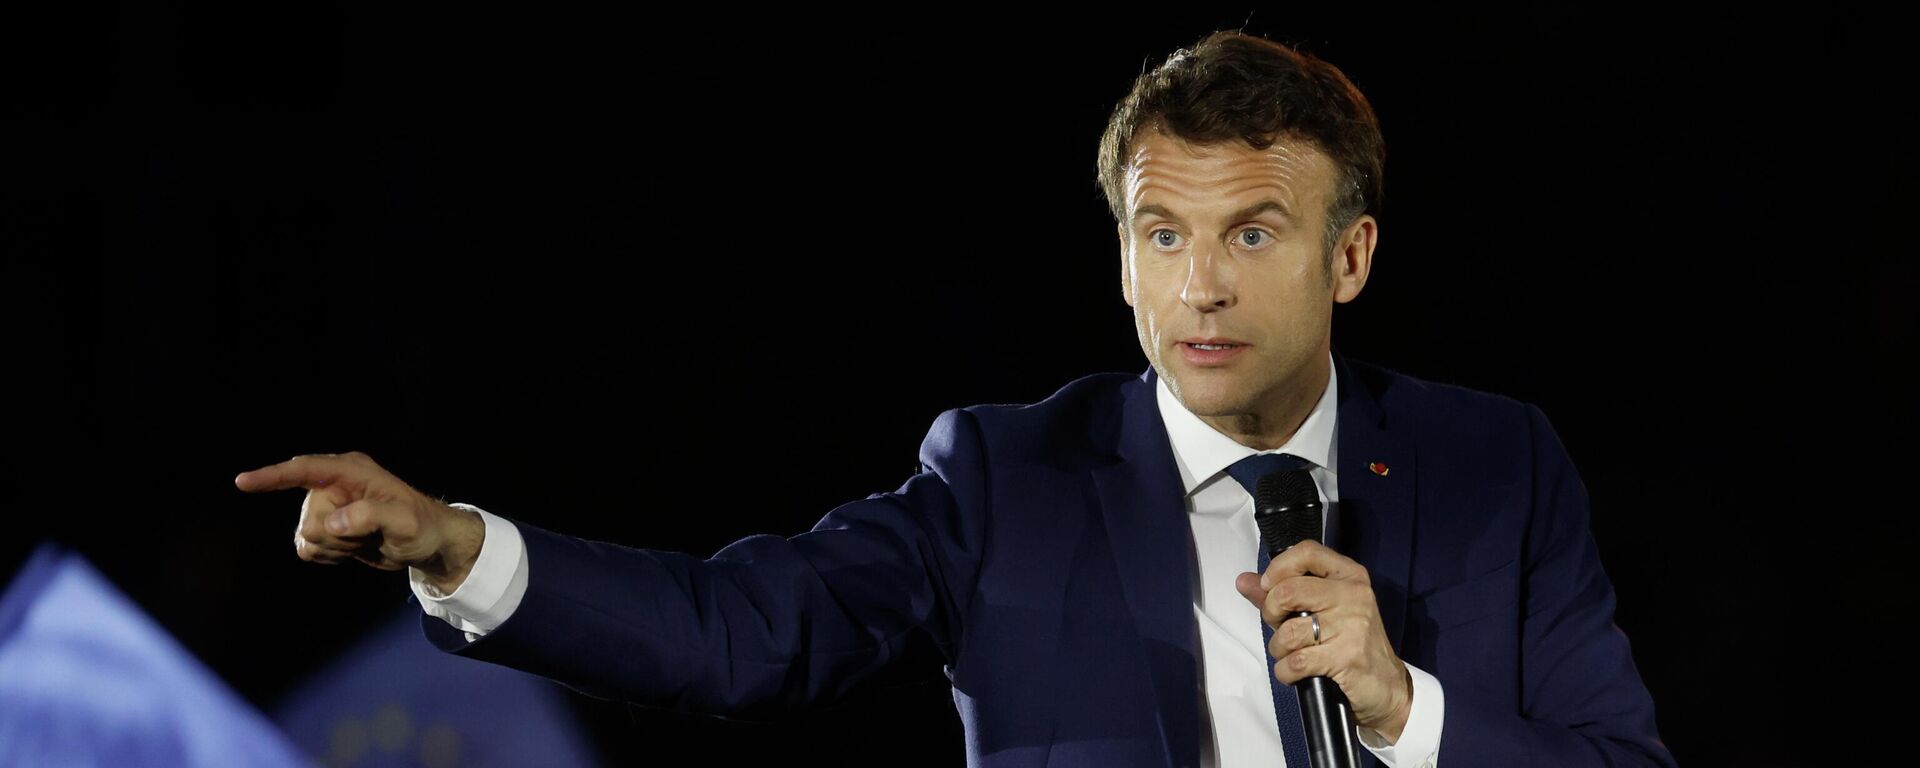 Current French President and centrist presidential candidate for reelection Emmanuel Macron delivers a speech during a campaign rally in Strasbourg, eastern France, Tuesday, April 12, 2022 . Macron, with strong pro-European views, and far-right candidate Marine Le Pen, an anti-immigration nationalist, are facing each other in the presidential runoff on April 24. (AP Photo/Jean-Francois Badias) - Sputnik International, 1920, 12.07.2022